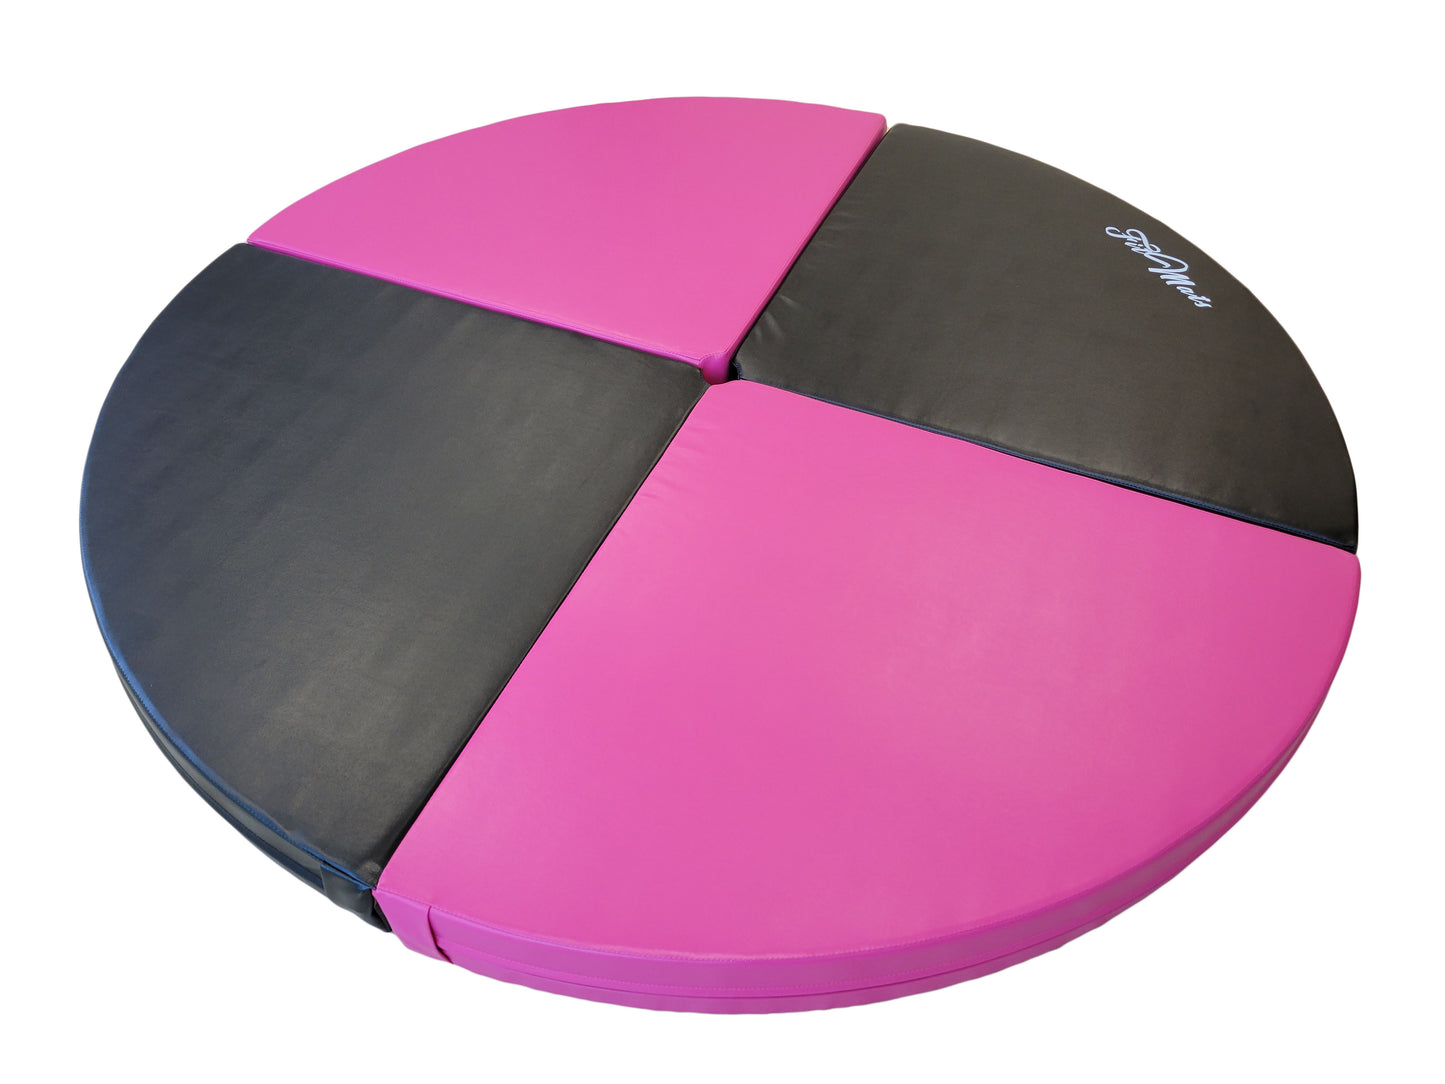 FitMats 5Ft Wide Cross Linked EPE Foam Safety Padding Portable Crash Mat. Foldable Exercise and Dance Pole Cushion w/PU Leather Skid Proof Covering.